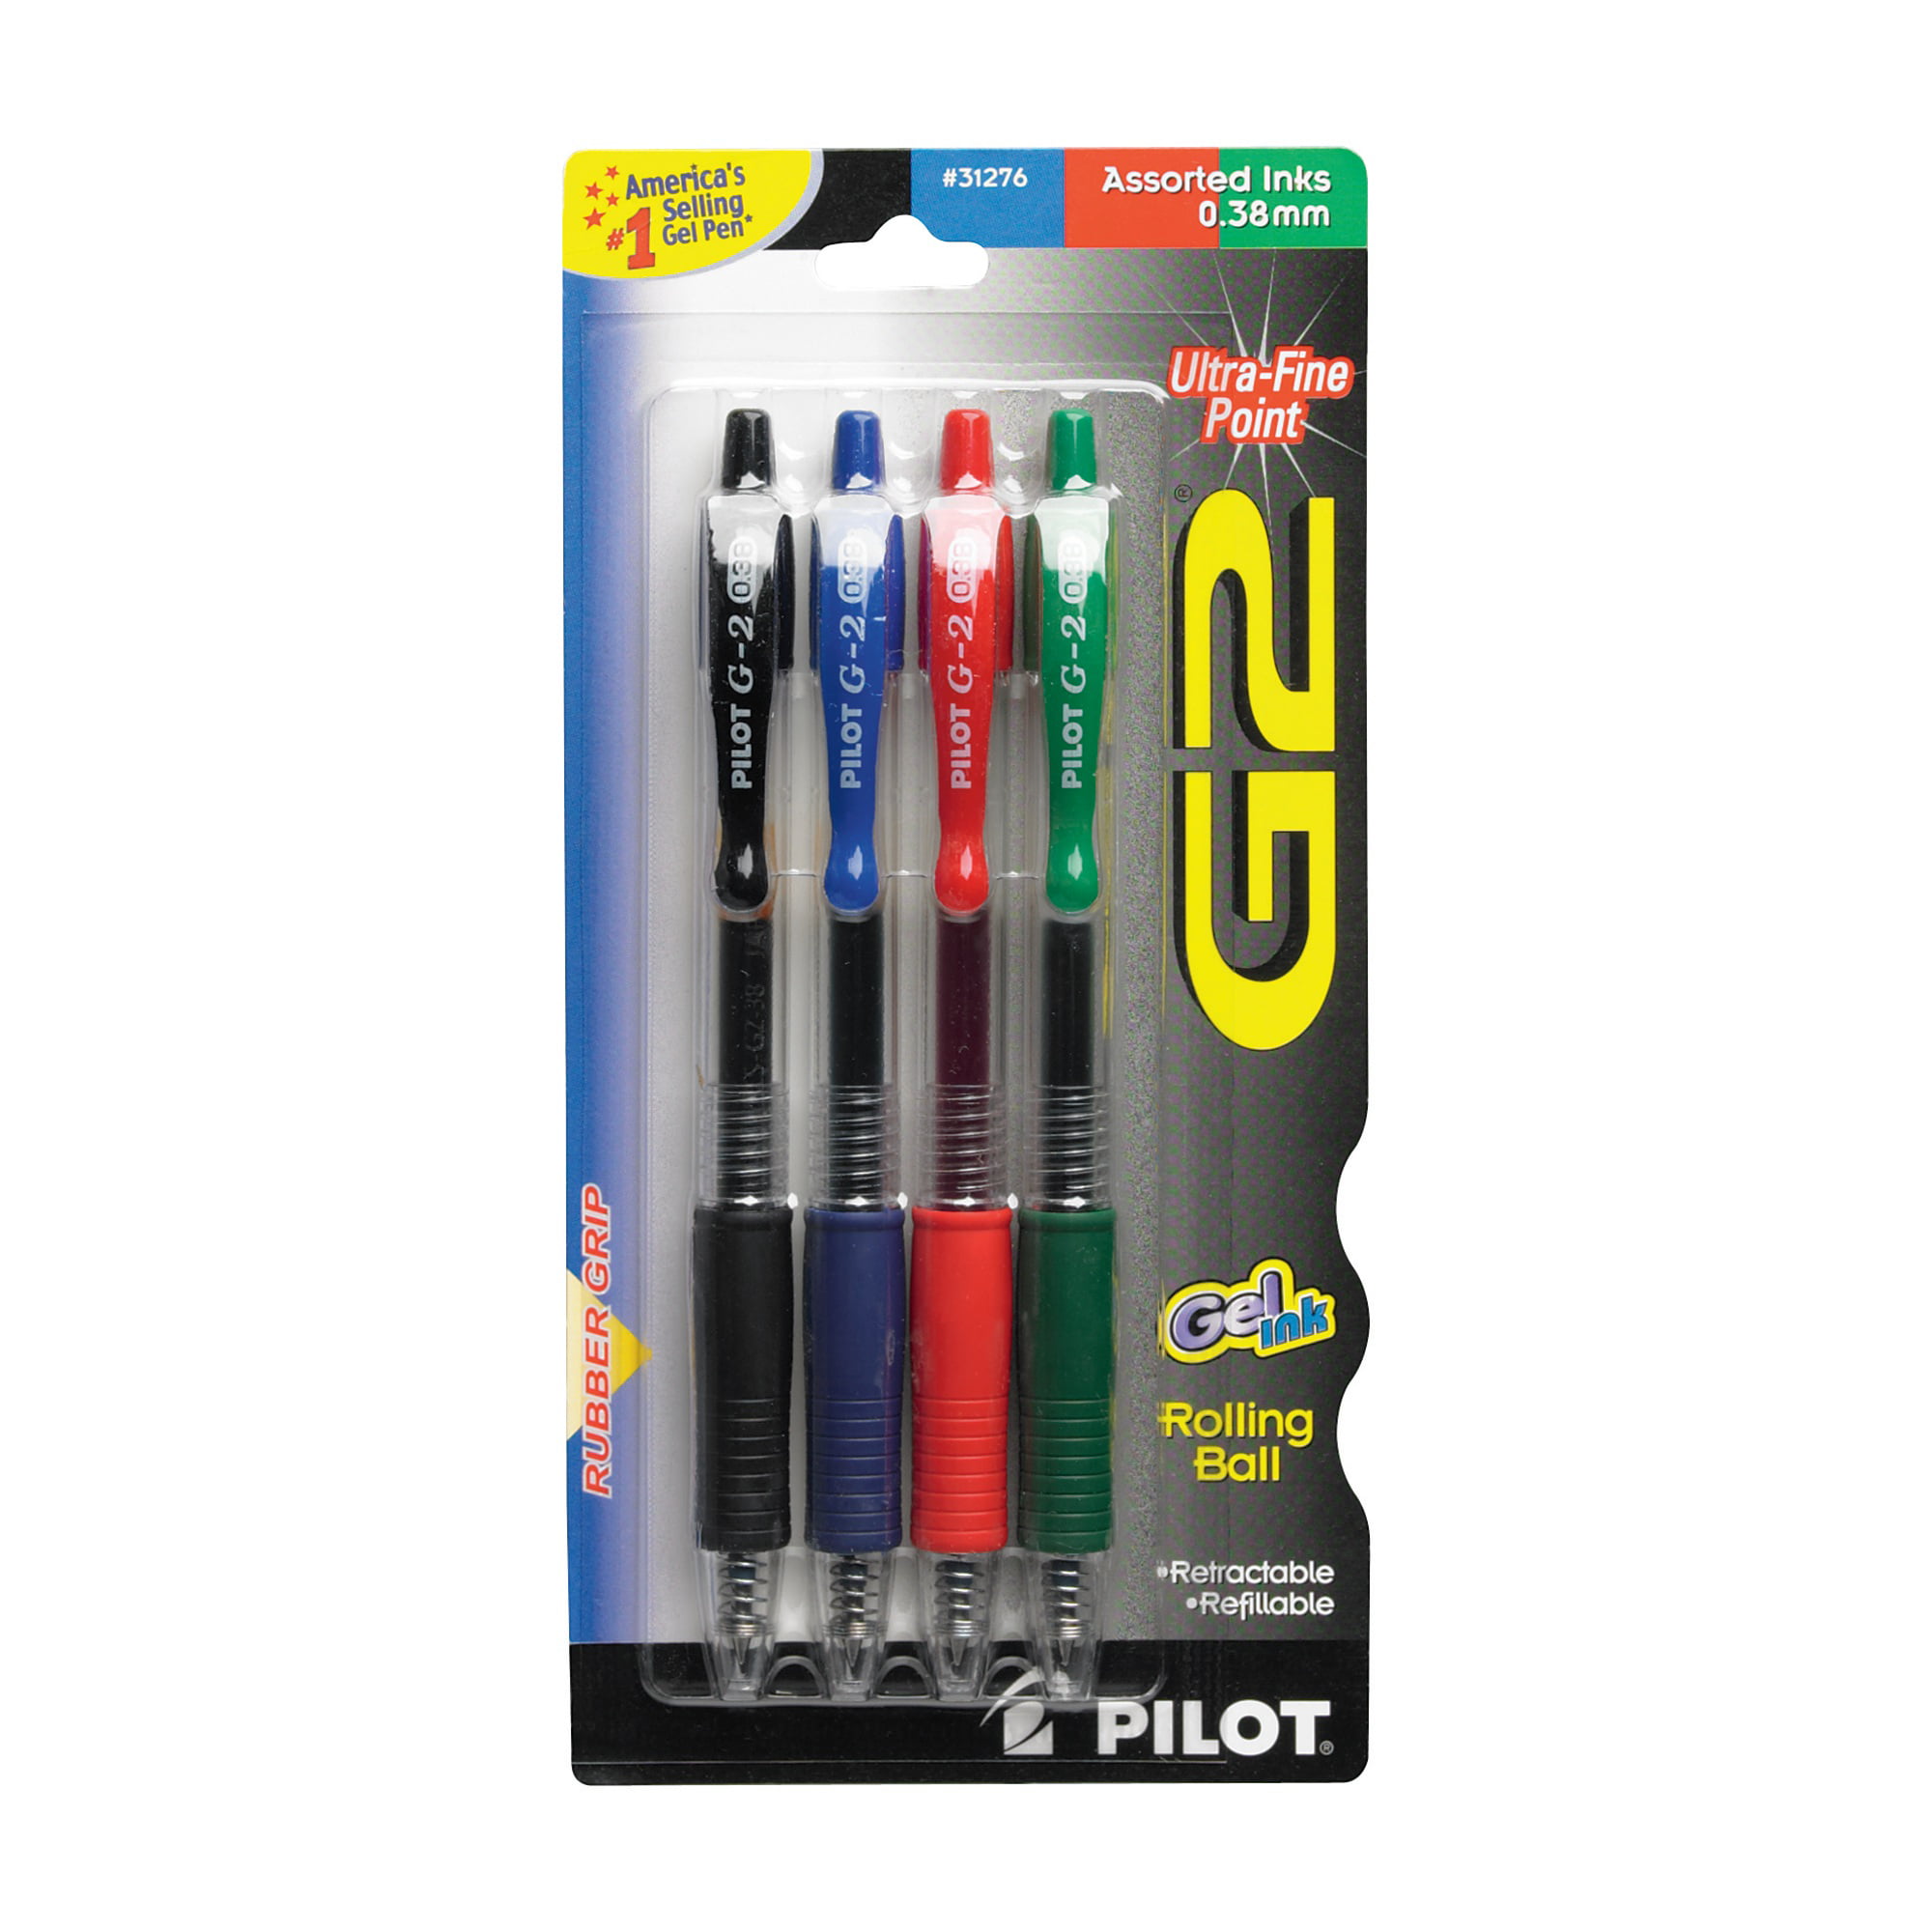 31276 Black/Blue/Red/Green Inks 4-Pack Ultra Fine Point PILOT G2 Premium Refillable & Retractable Rolling Ball Gel Pens - New 